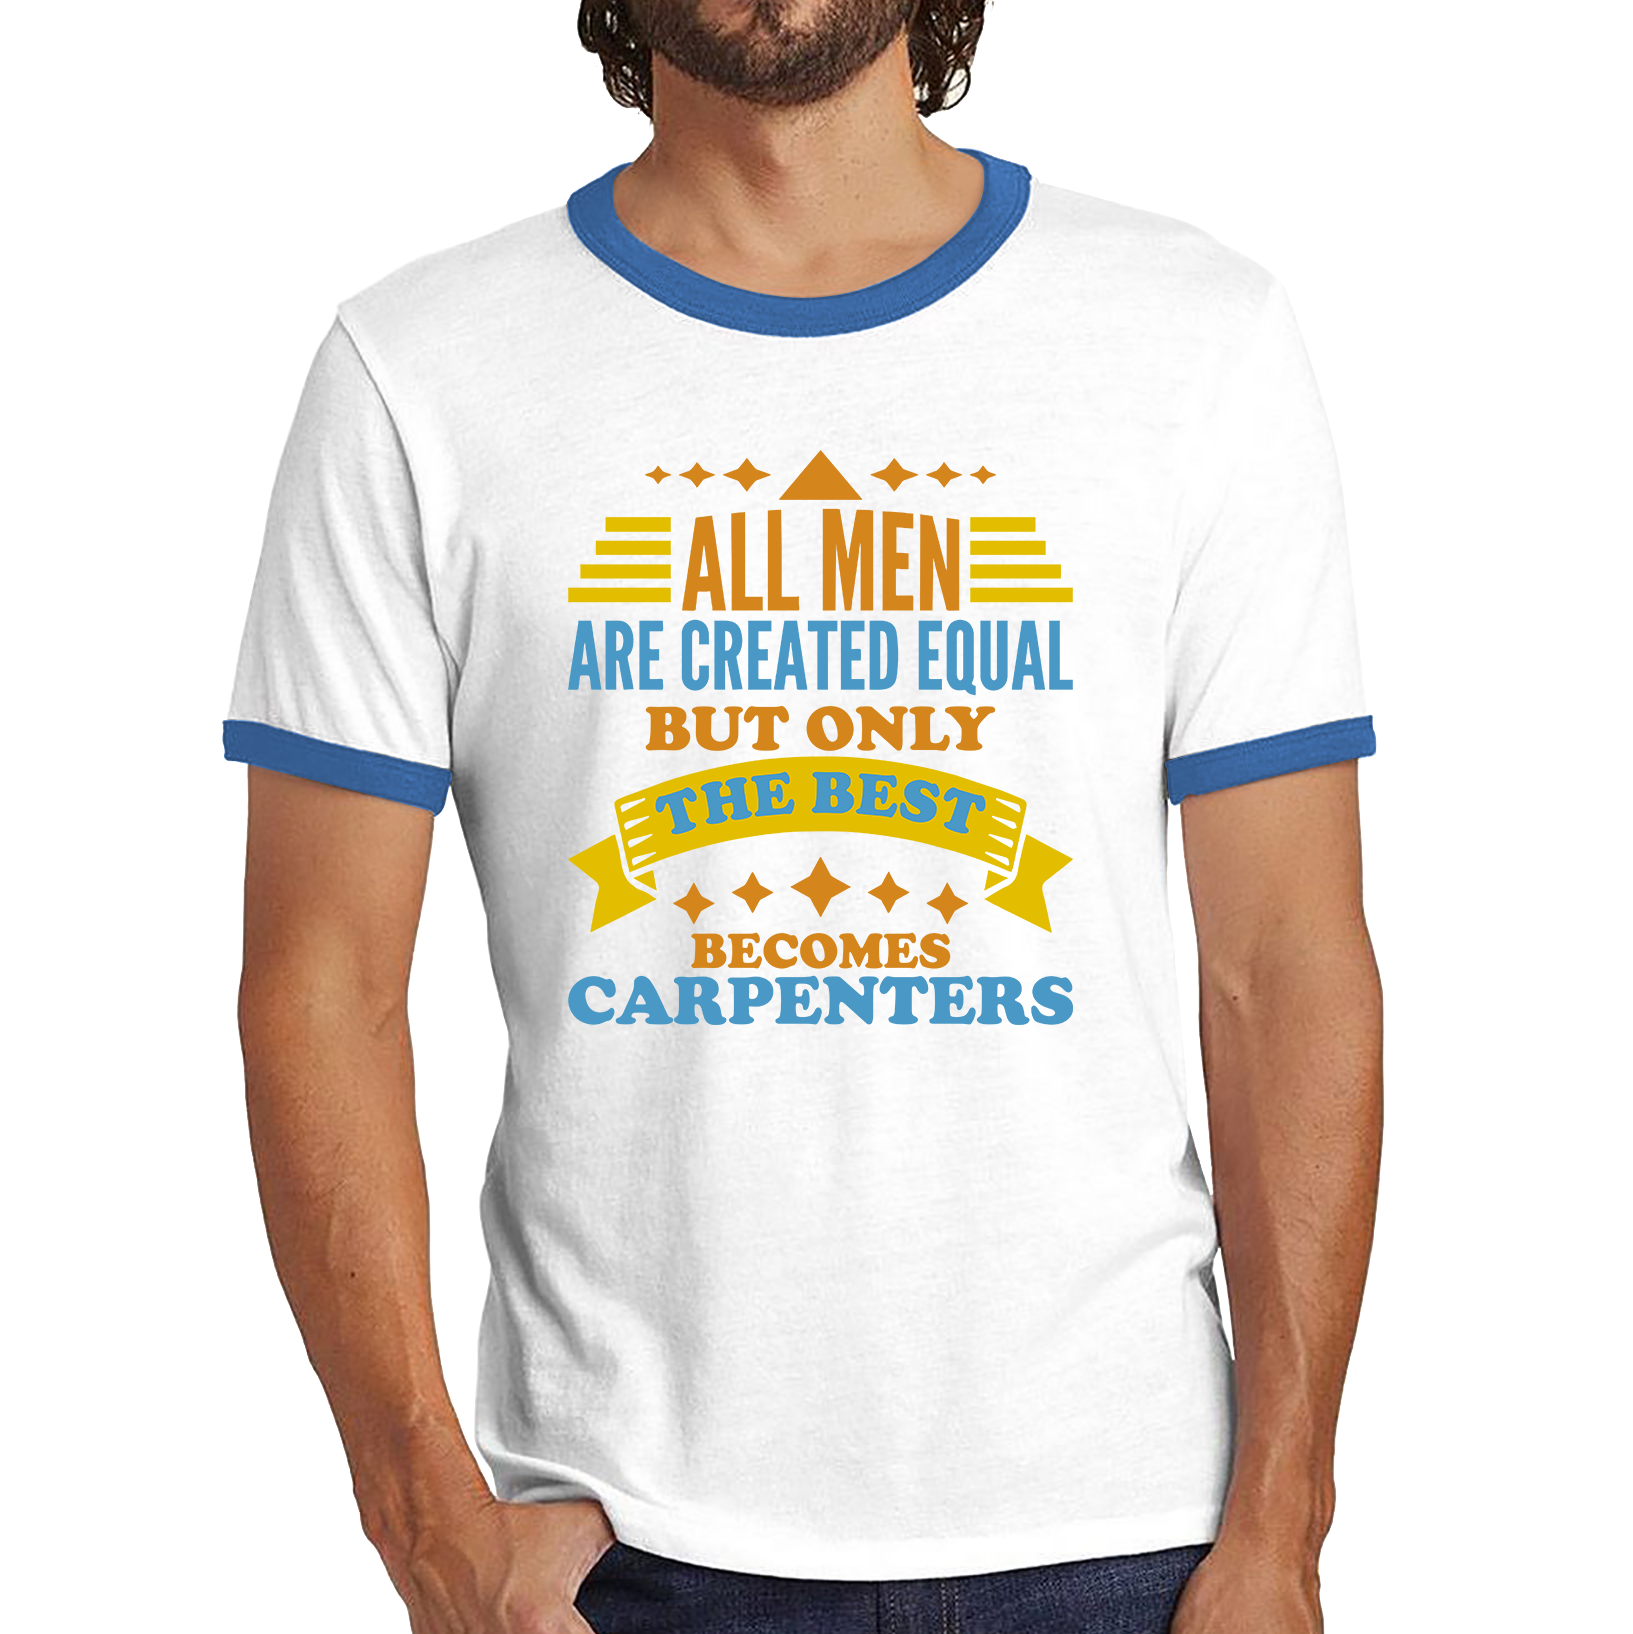 All Men Are Created Equal But Only The Best Becomes Carpenters Ringer T Shirt